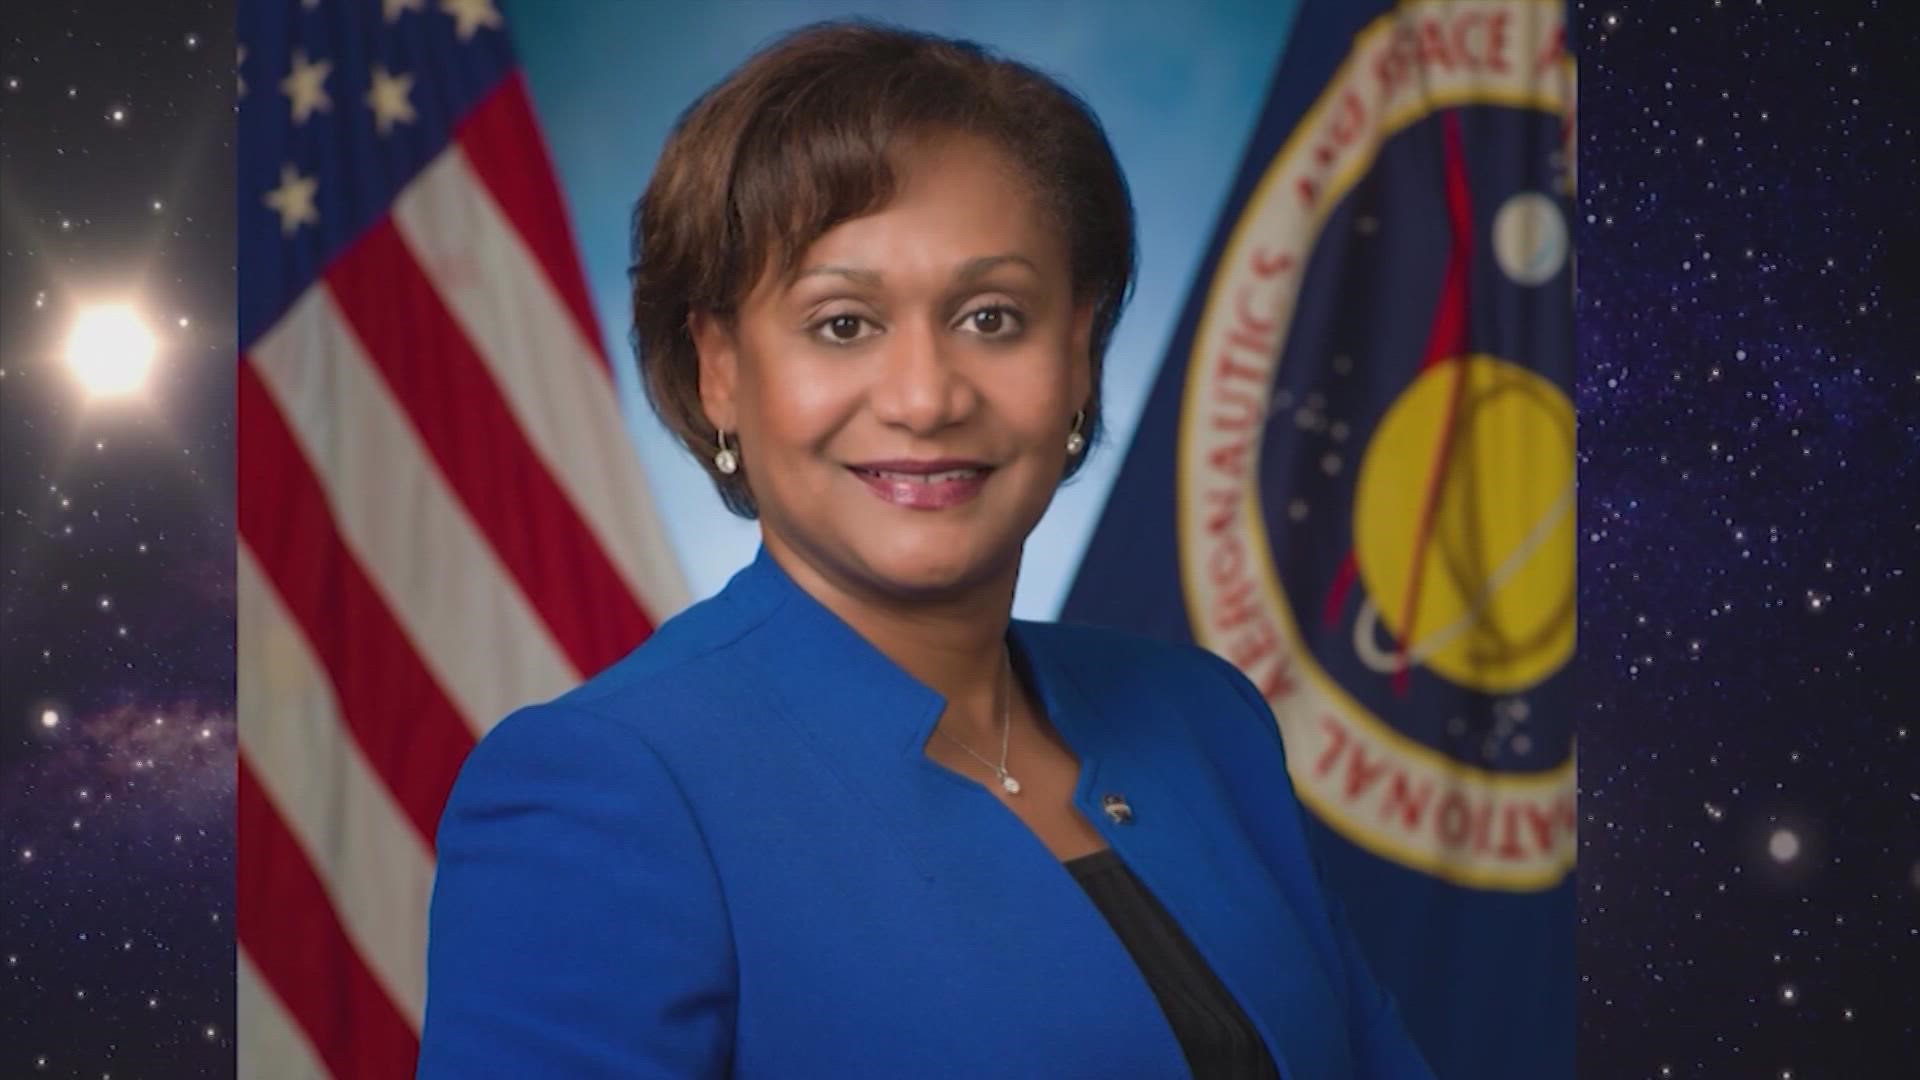 The parade is set to run in person on Jan 17, led by NASA Johnson Space Center director Vanessa Wyche as grand marshal.